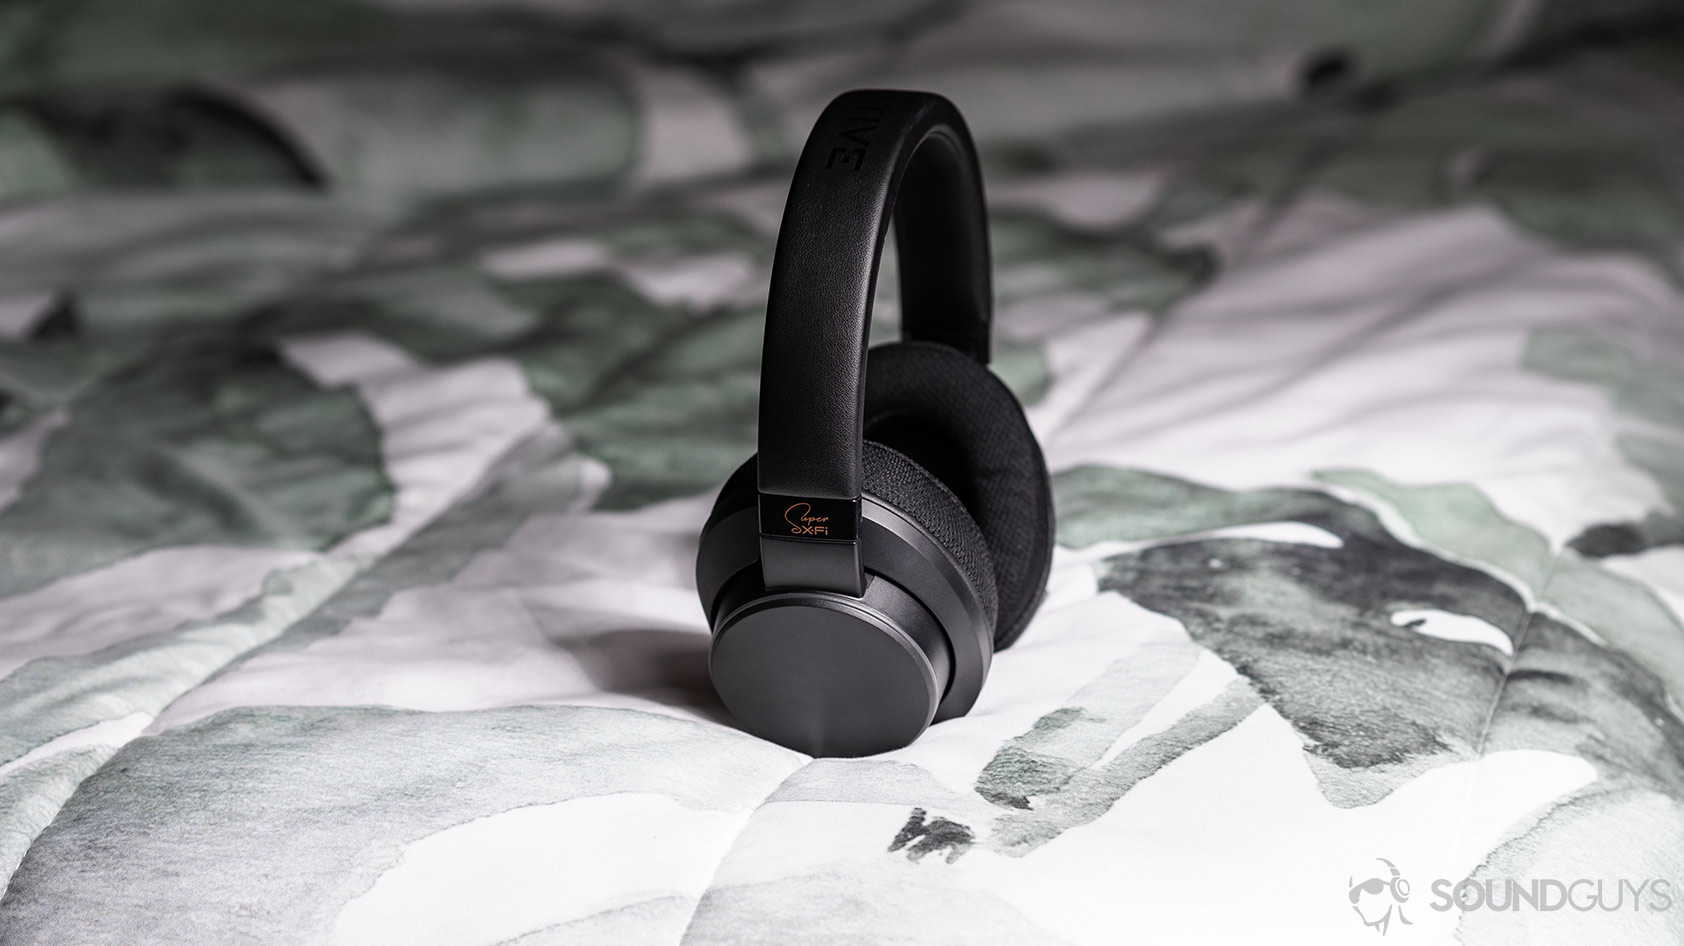 Creative SXFI Air: The headphones standing up on a bed.